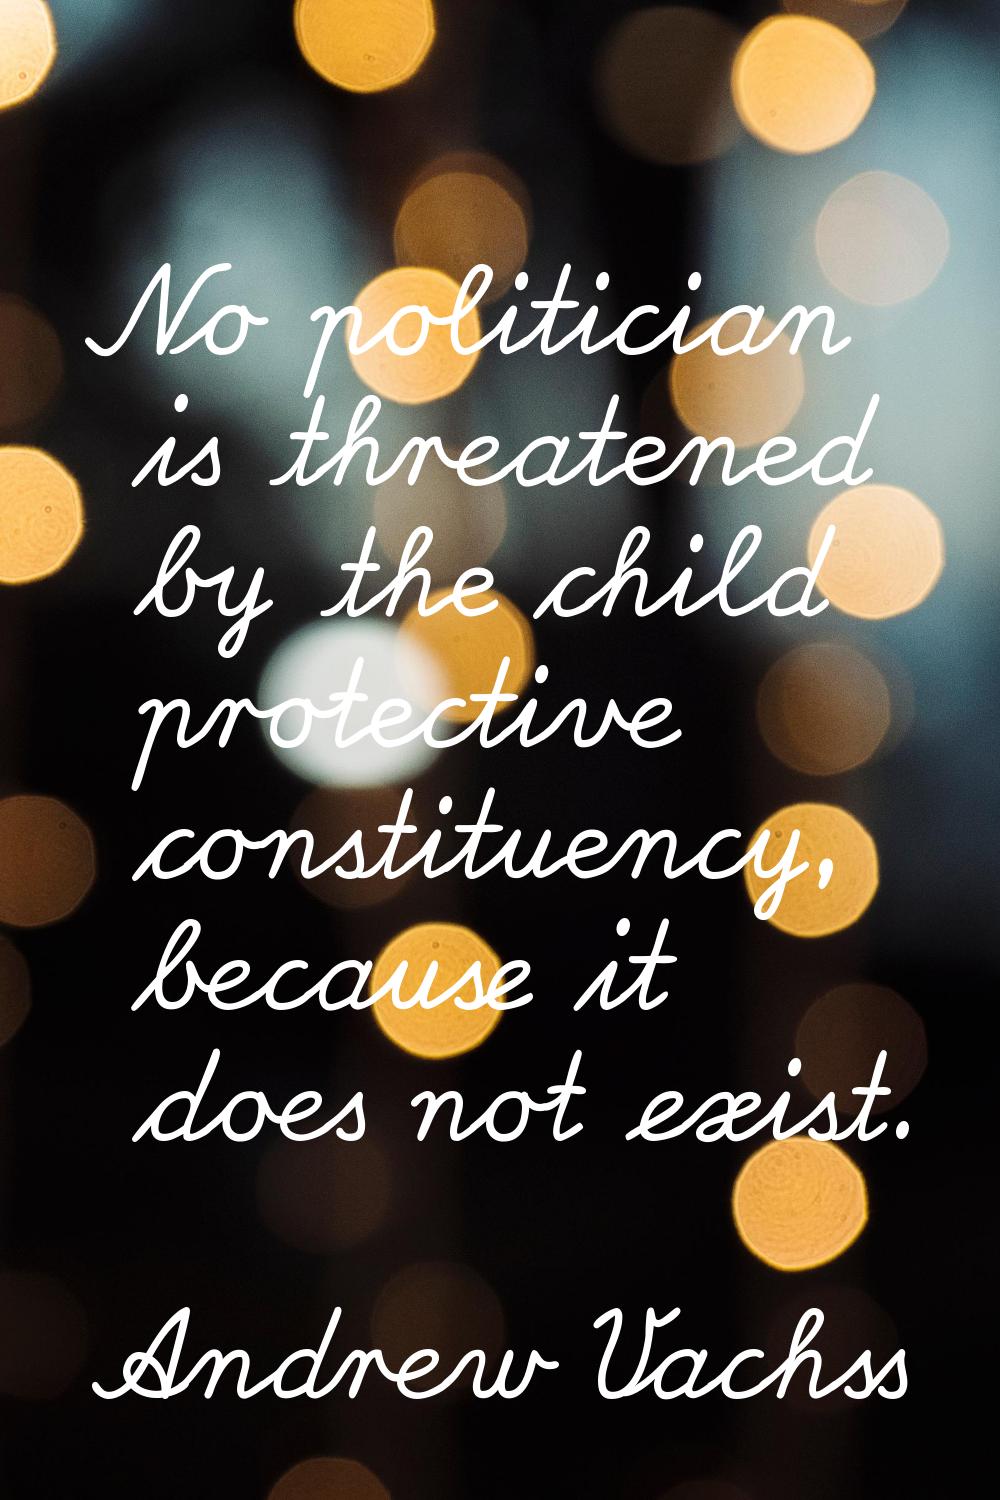 No politician is threatened by the child protective constituency, because it does not exist.